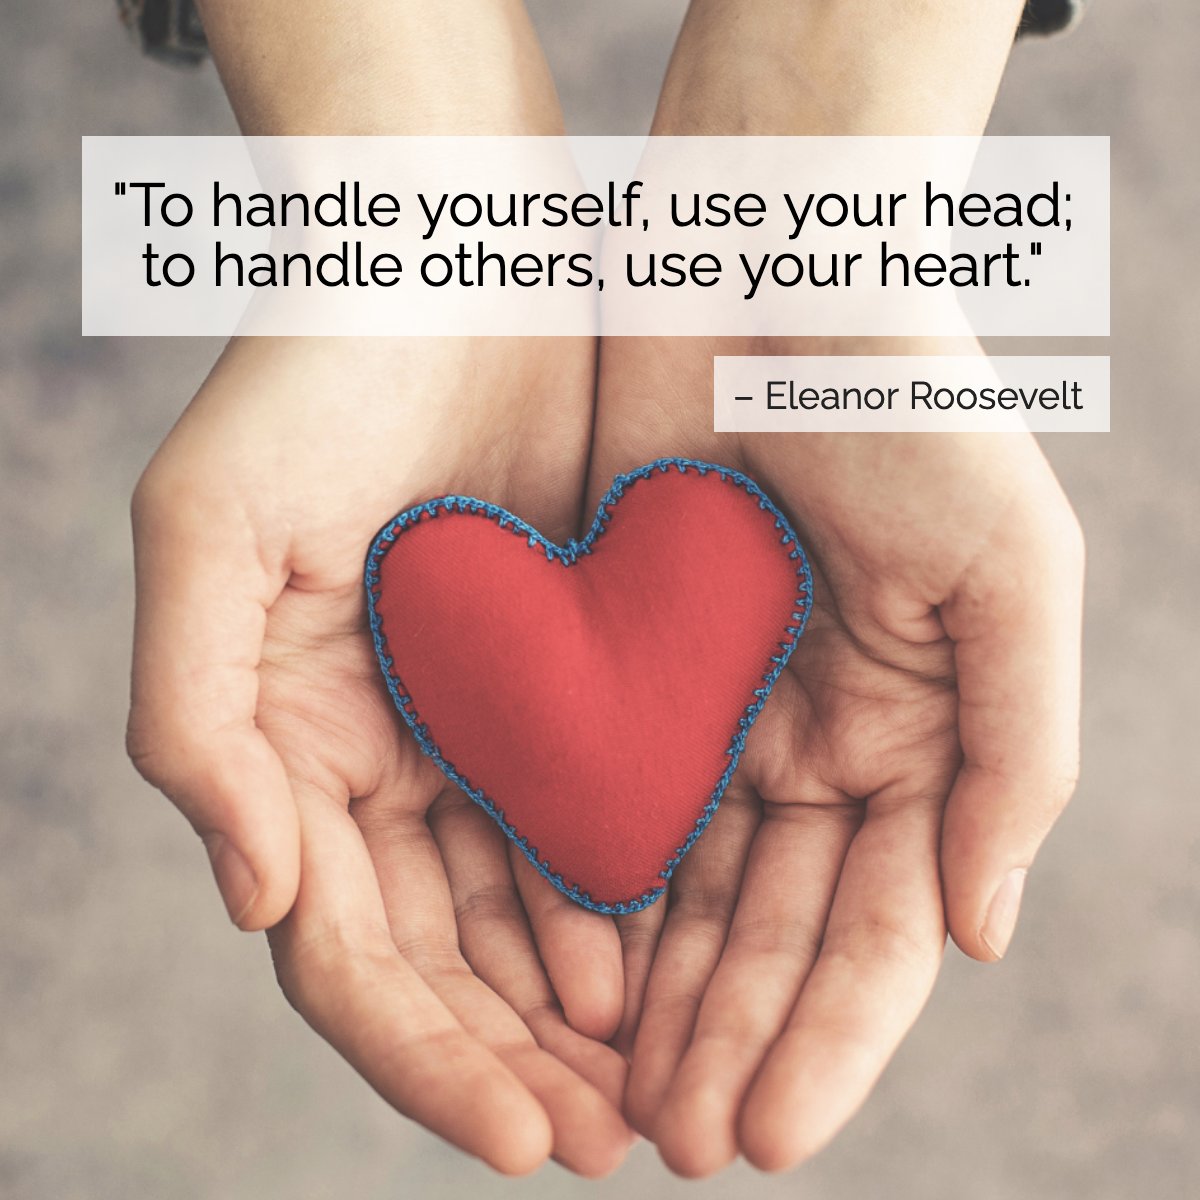 Eleanor Roosevelt was an American political figure, diplomat, and activist. 

She served as the first lady of the United States from 1933 to 1945!

#inspiring #quote #eleanorroosevelt #inspirational 
 #RiversideRealestate #RiversideHomes #RiversideBroker #JamesCottrell